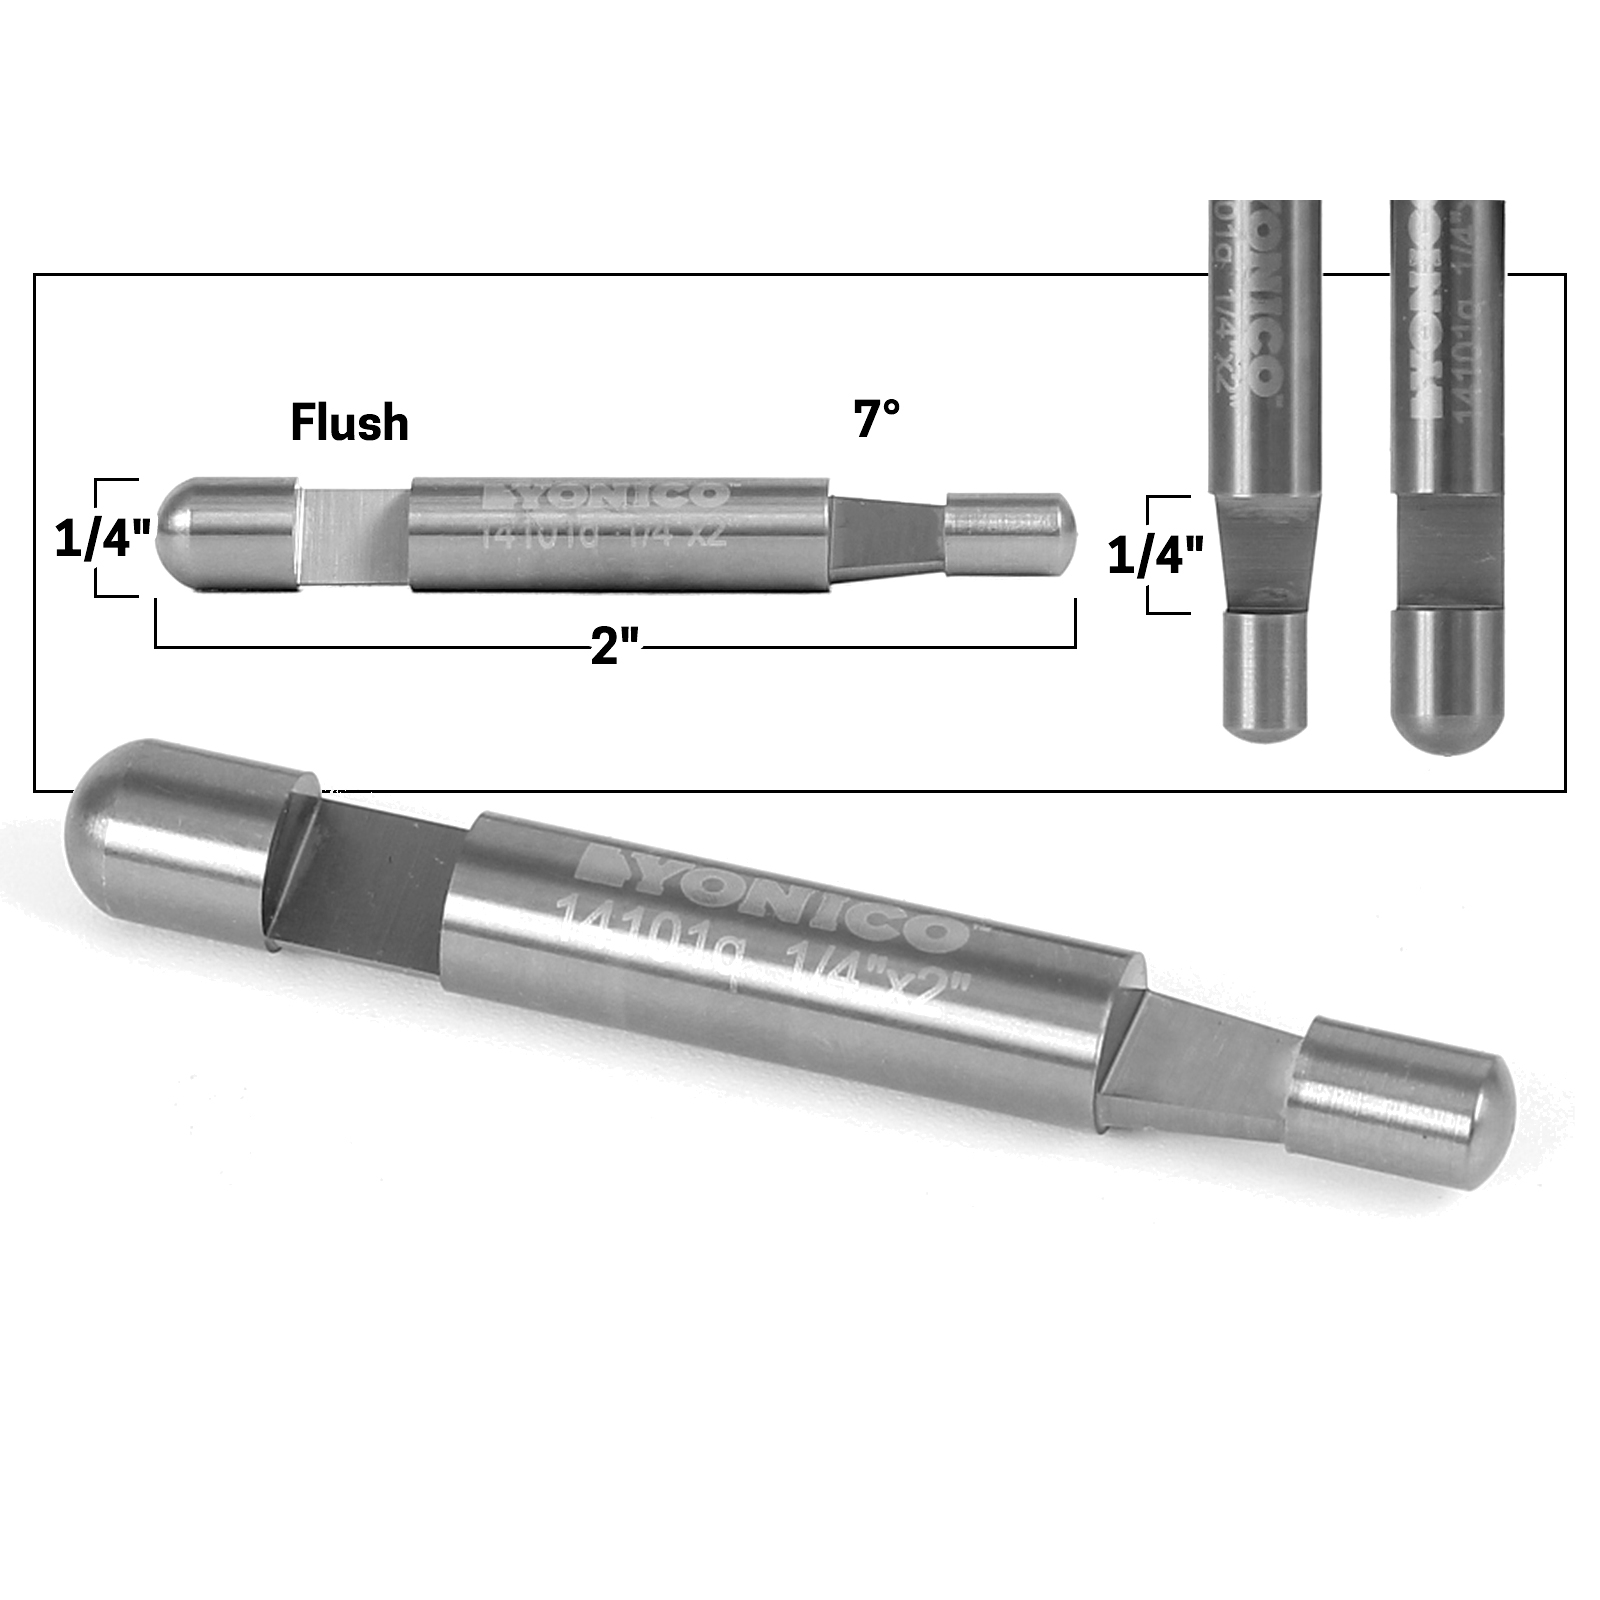 Details about   1/4Inch Shank Straight Cutter Cutting Bearing Extra Long Flush Trim Router Bit 